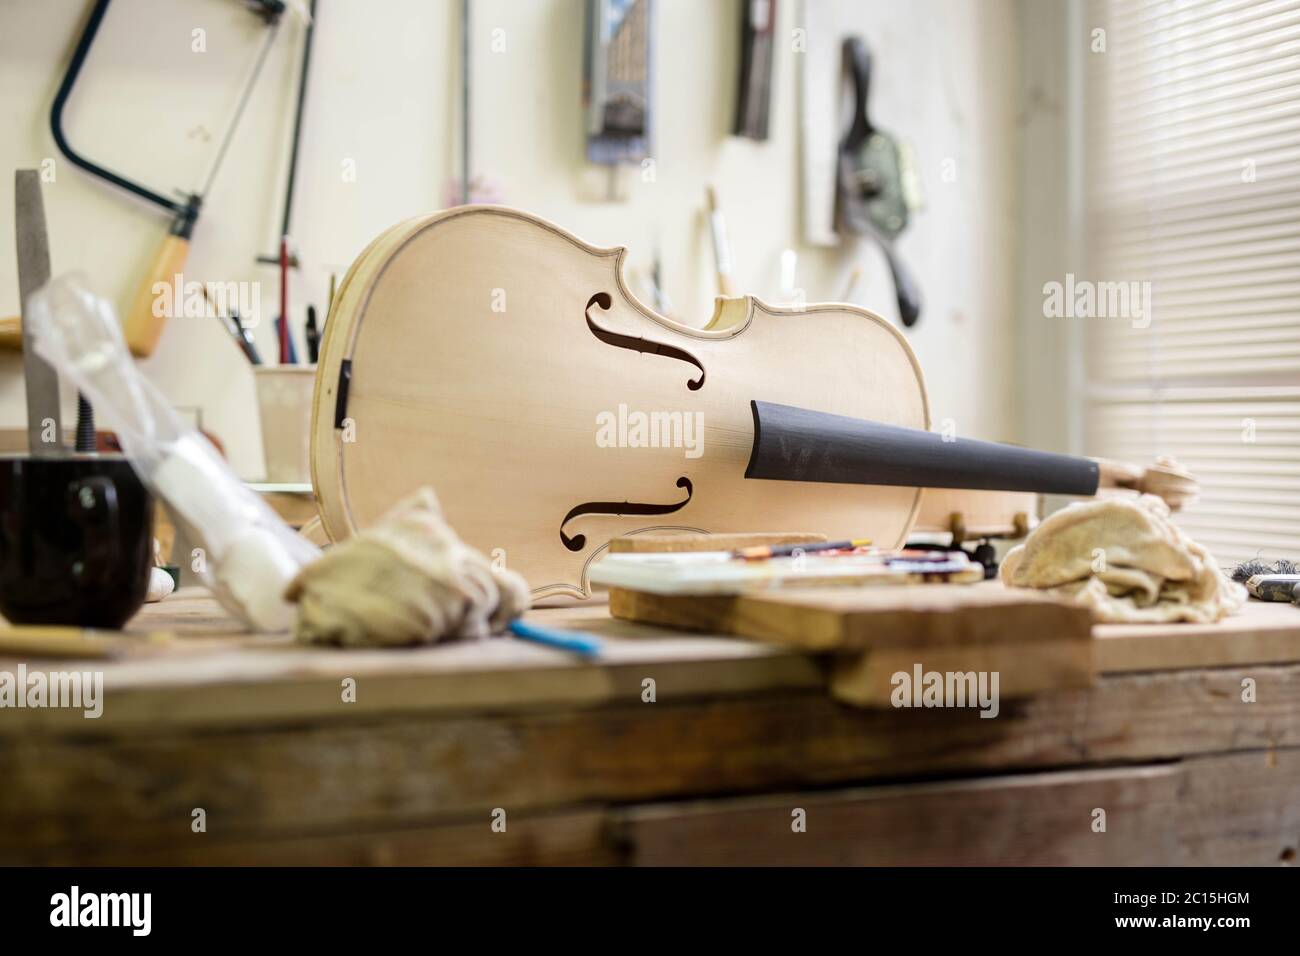 An off-white violin, ready for restringing, sat on a crafting bench after being sanded down and varnished in a work shop in Cheltenham. Stock Photo